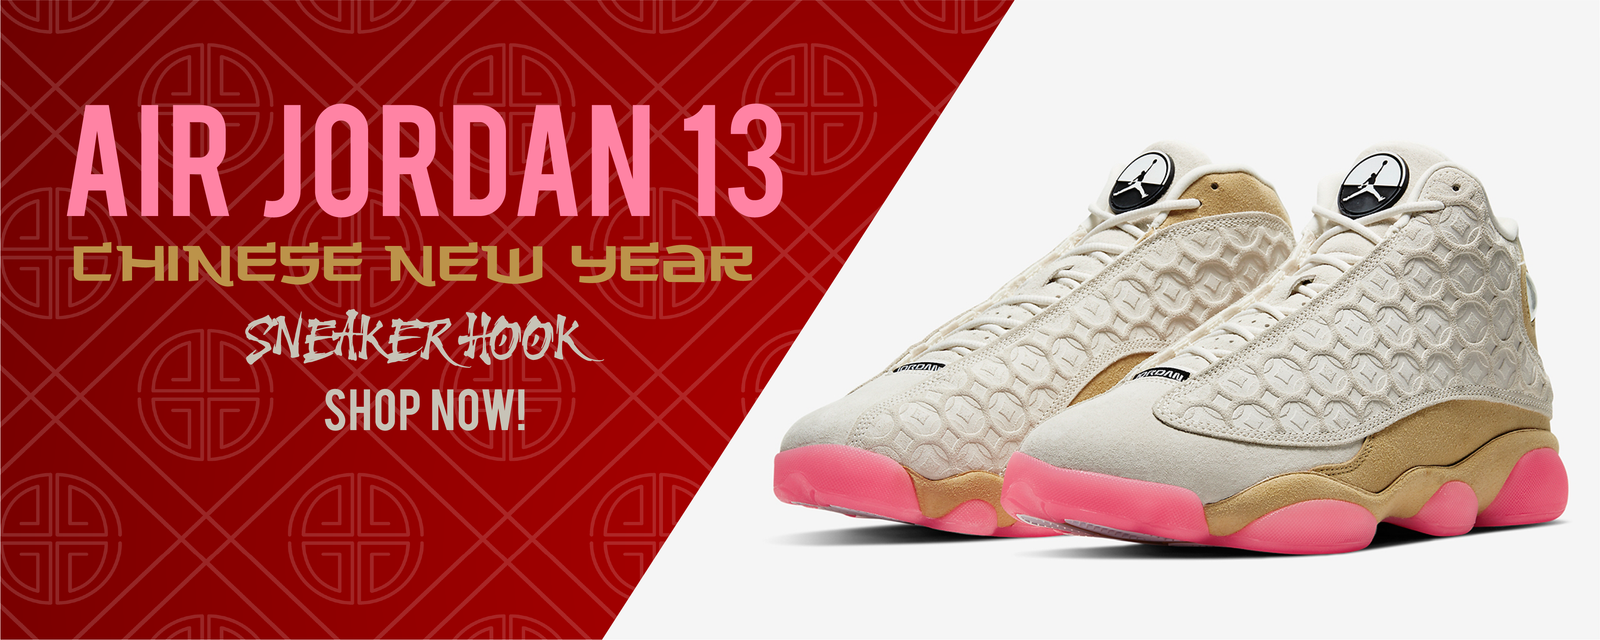 jordan 13 chinese new year outfits